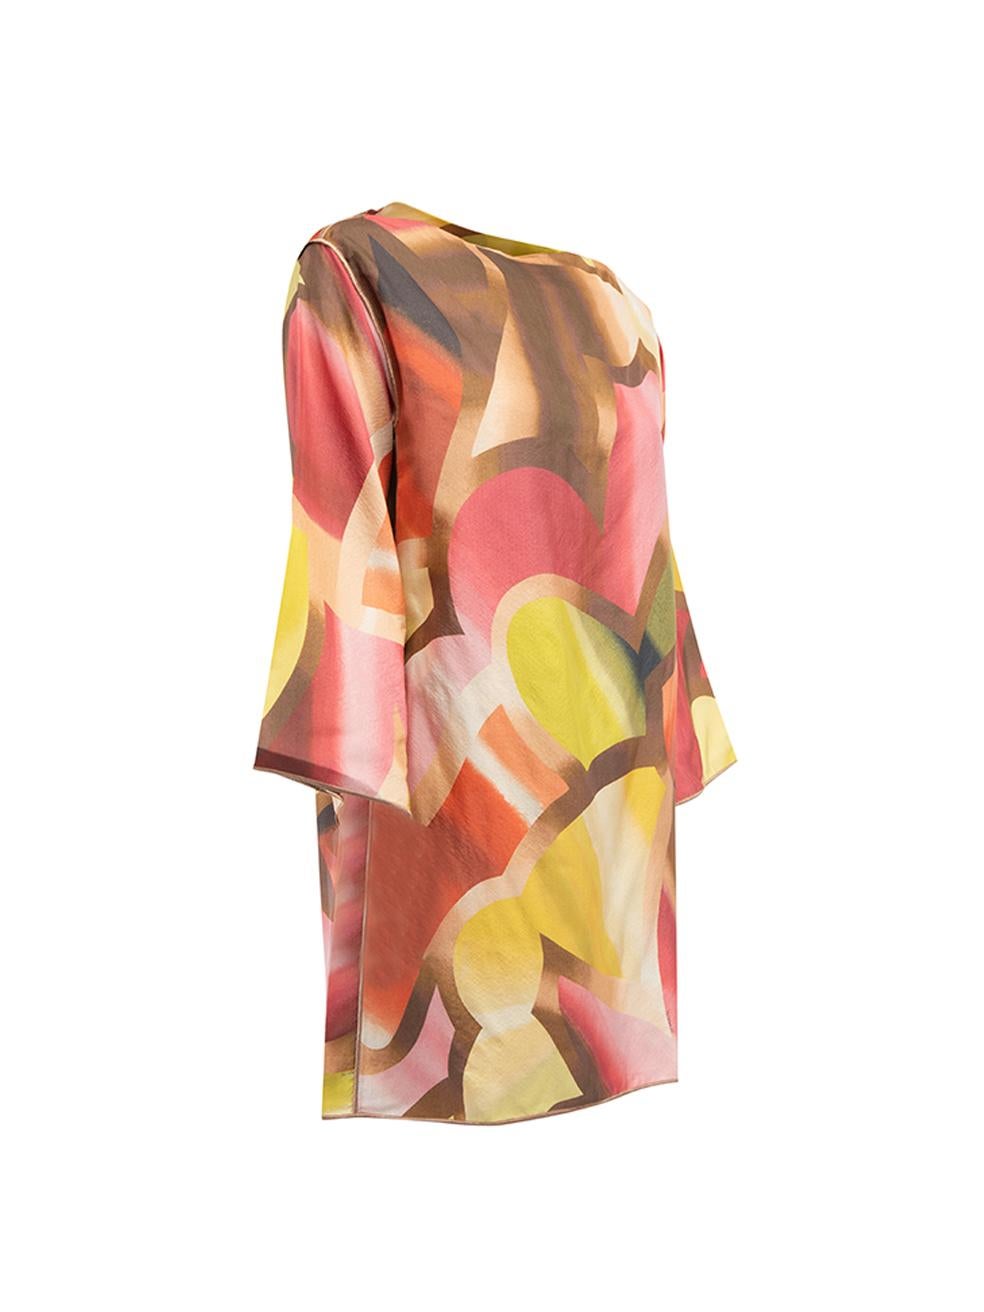 CONDITION is Very good. Hardly any visible wear to top is evident on this used Missoni designer resale item. 
 
 Details
  Multicolour- Orange, yellow and pink
 Silk
 Tunic long top
 Long sleeves
 Abstract pattern
 Wide boat neckline
 
 
 Made in